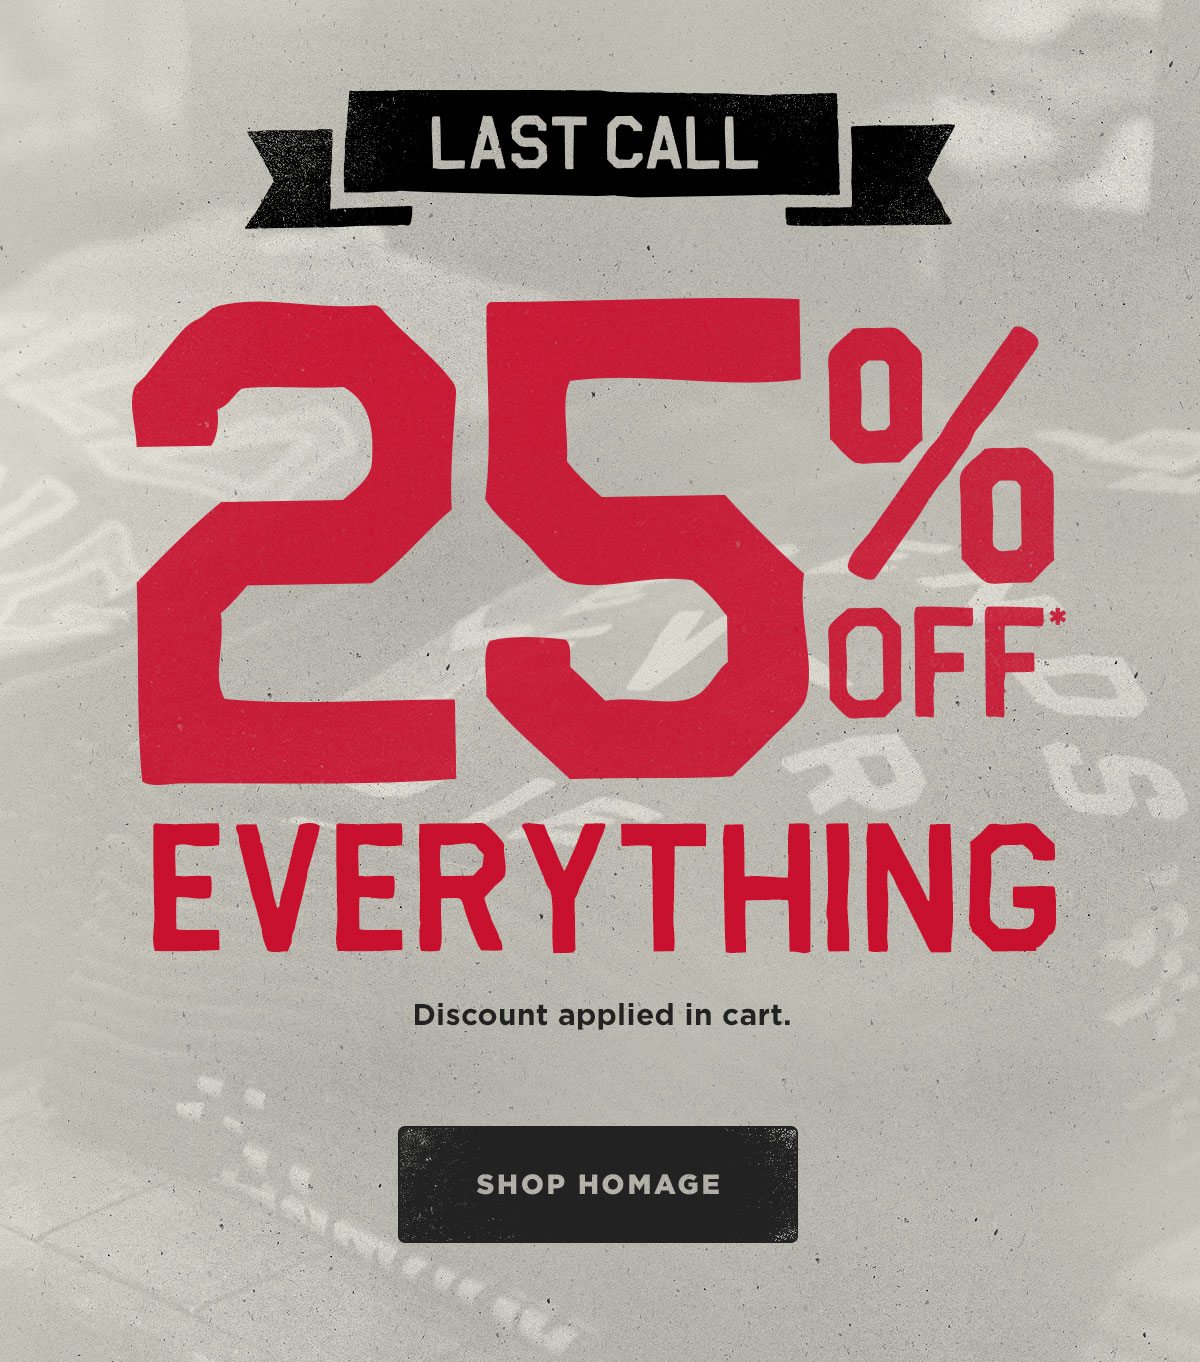 Last Call! 25% off Everything